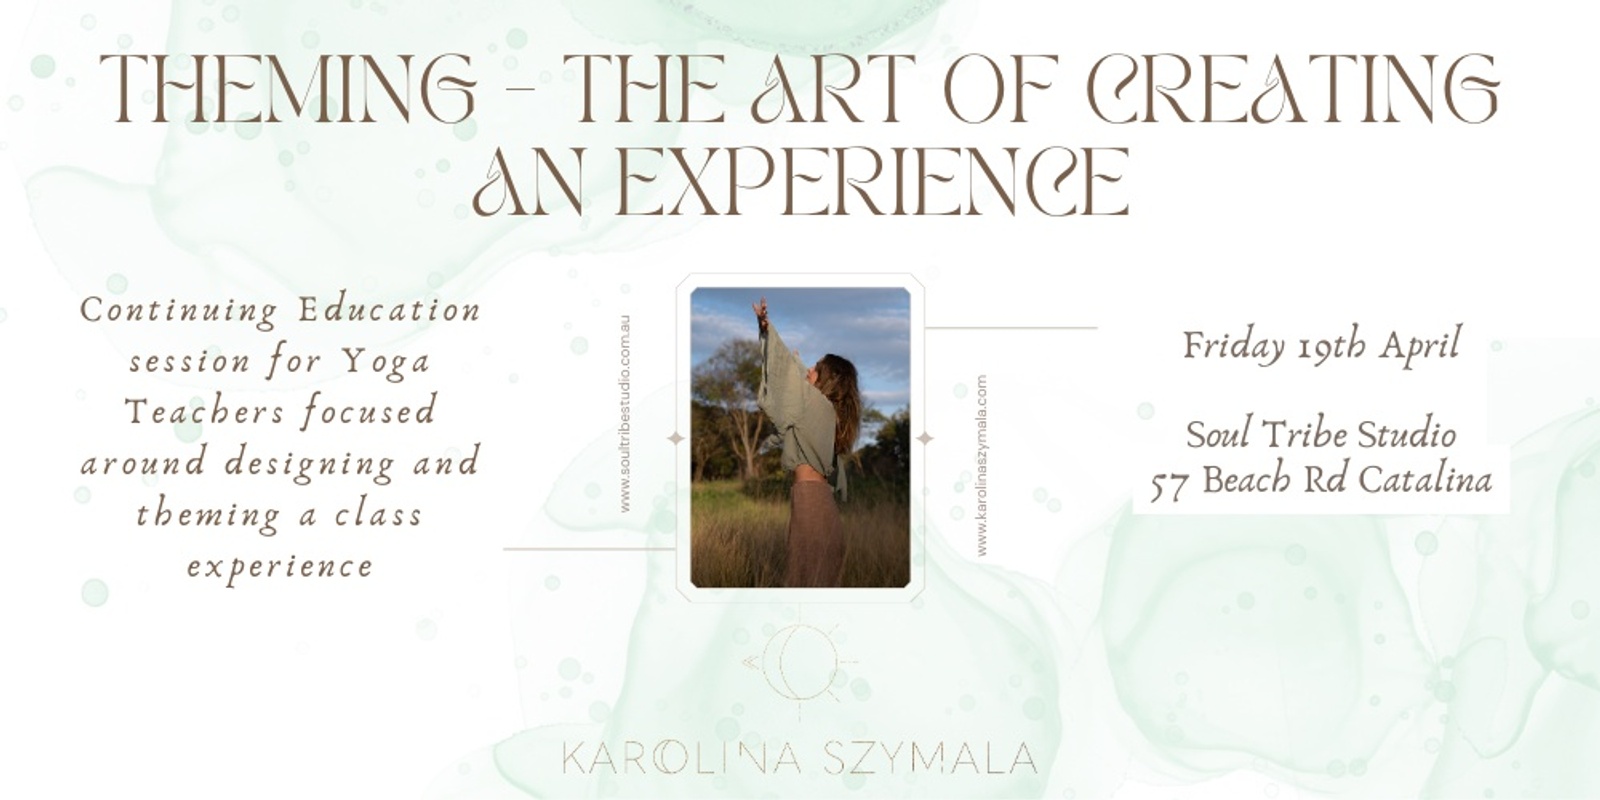 Banner image for Theming - The Art Of Creating An Experience